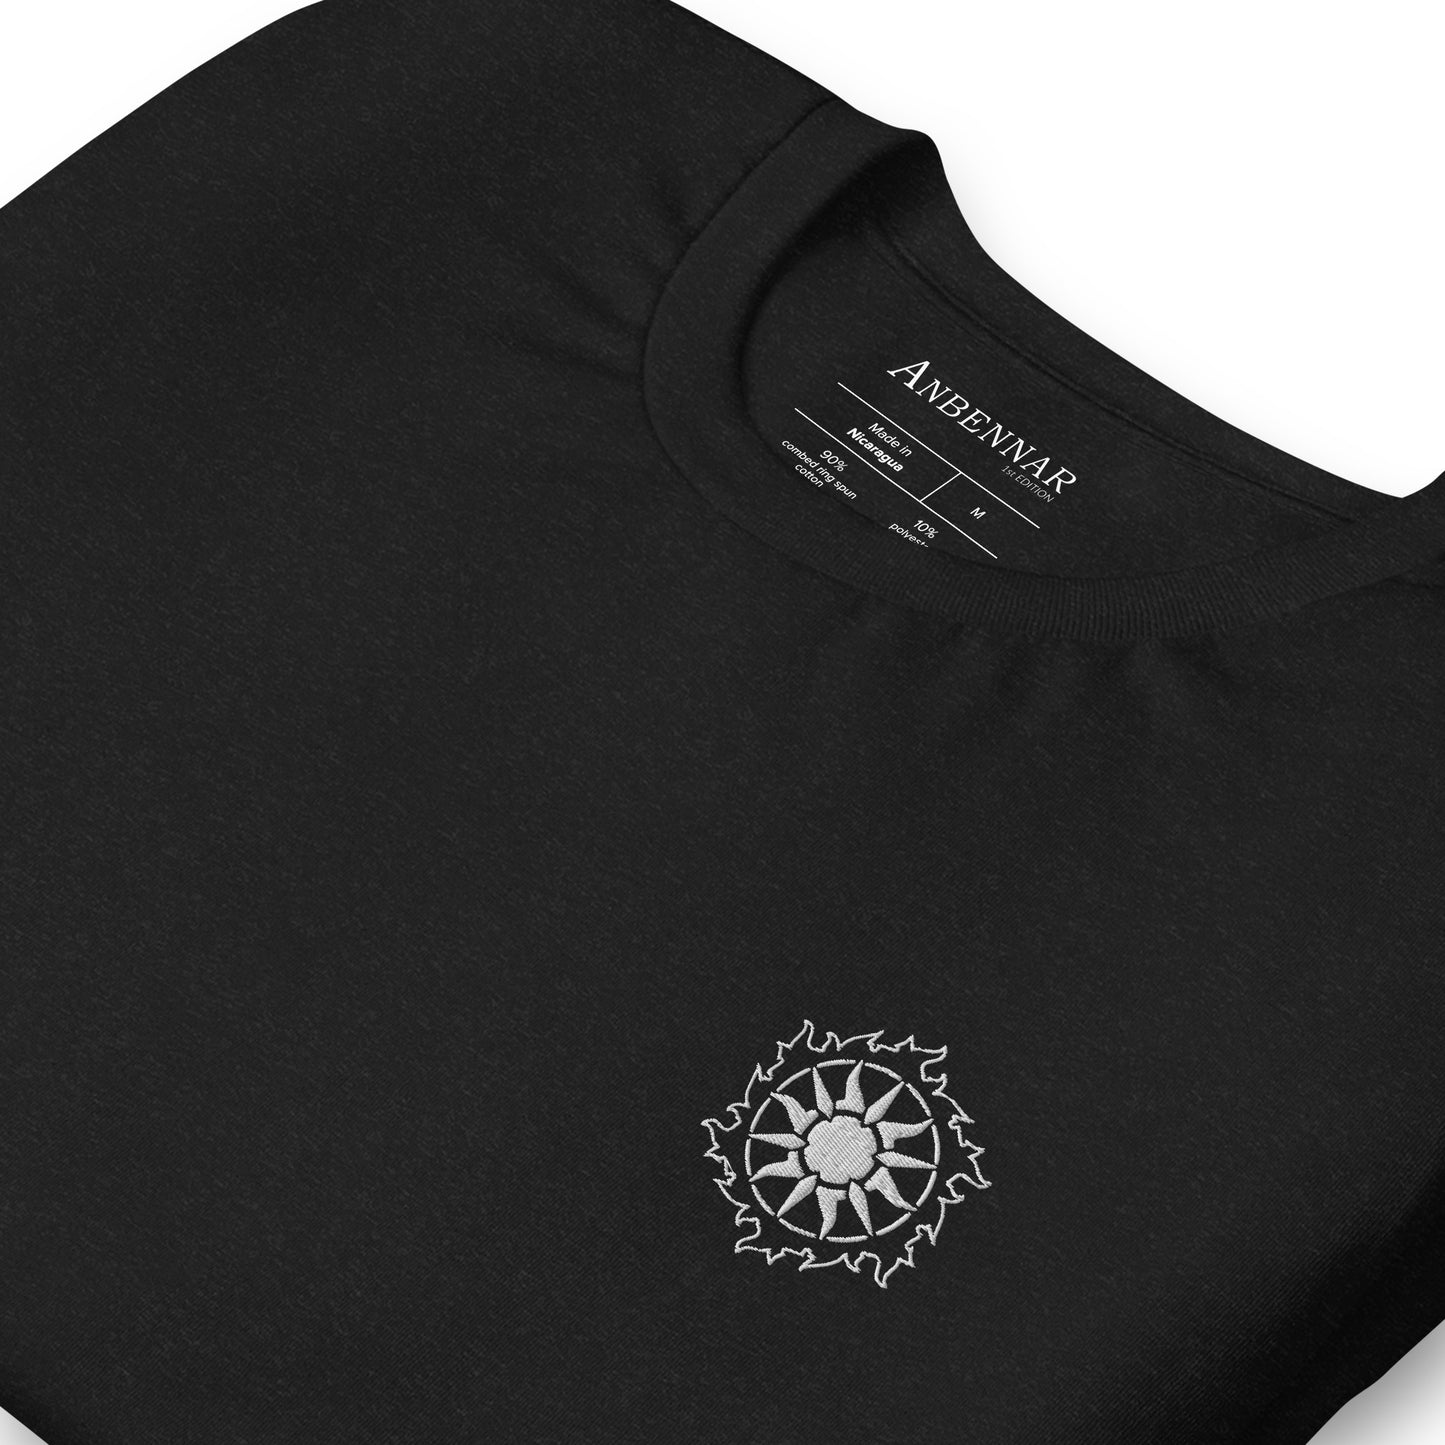 Jadd Empire Sun, Embroidered - 1st Edition Limited - Unisex T-shirt